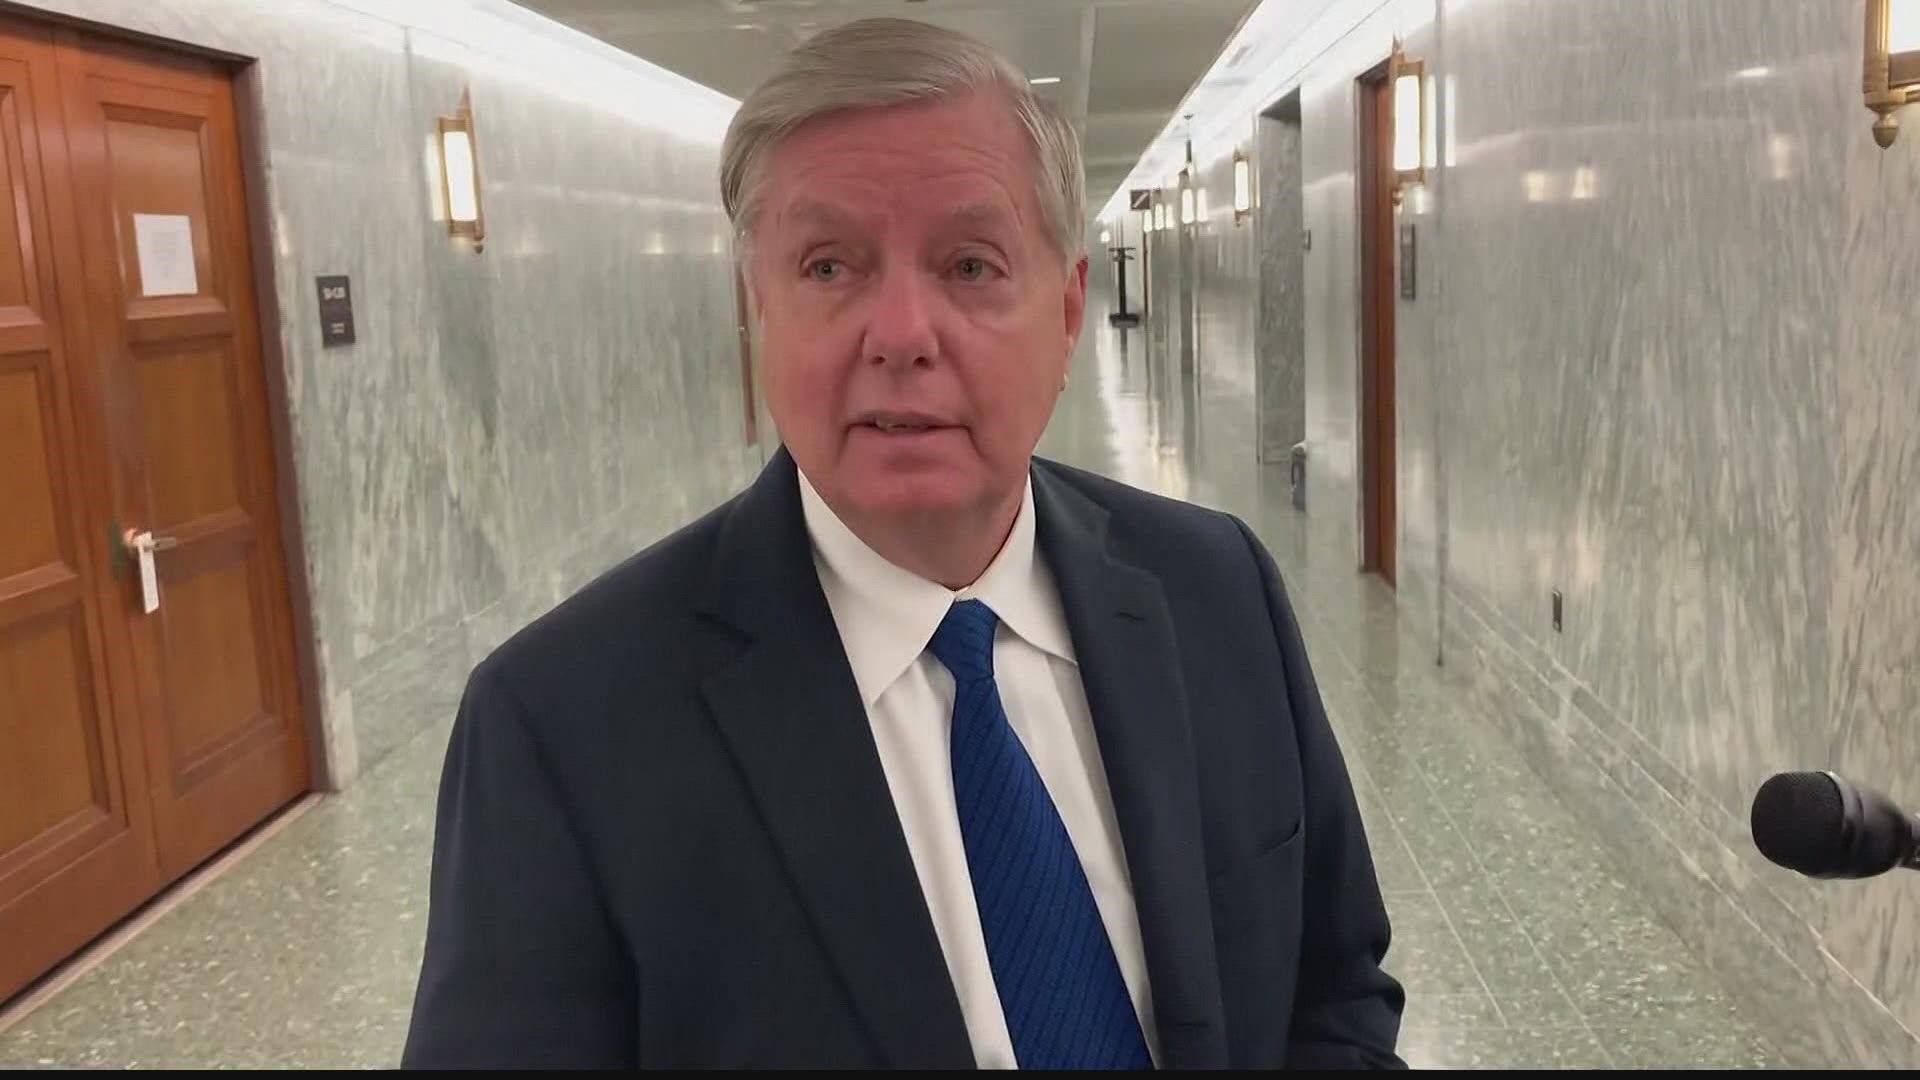 A federal judge on Thursday ruled that constitutional protections don't shield U.S. Sen. Lindsey Graham from testifying before a special grand jury.